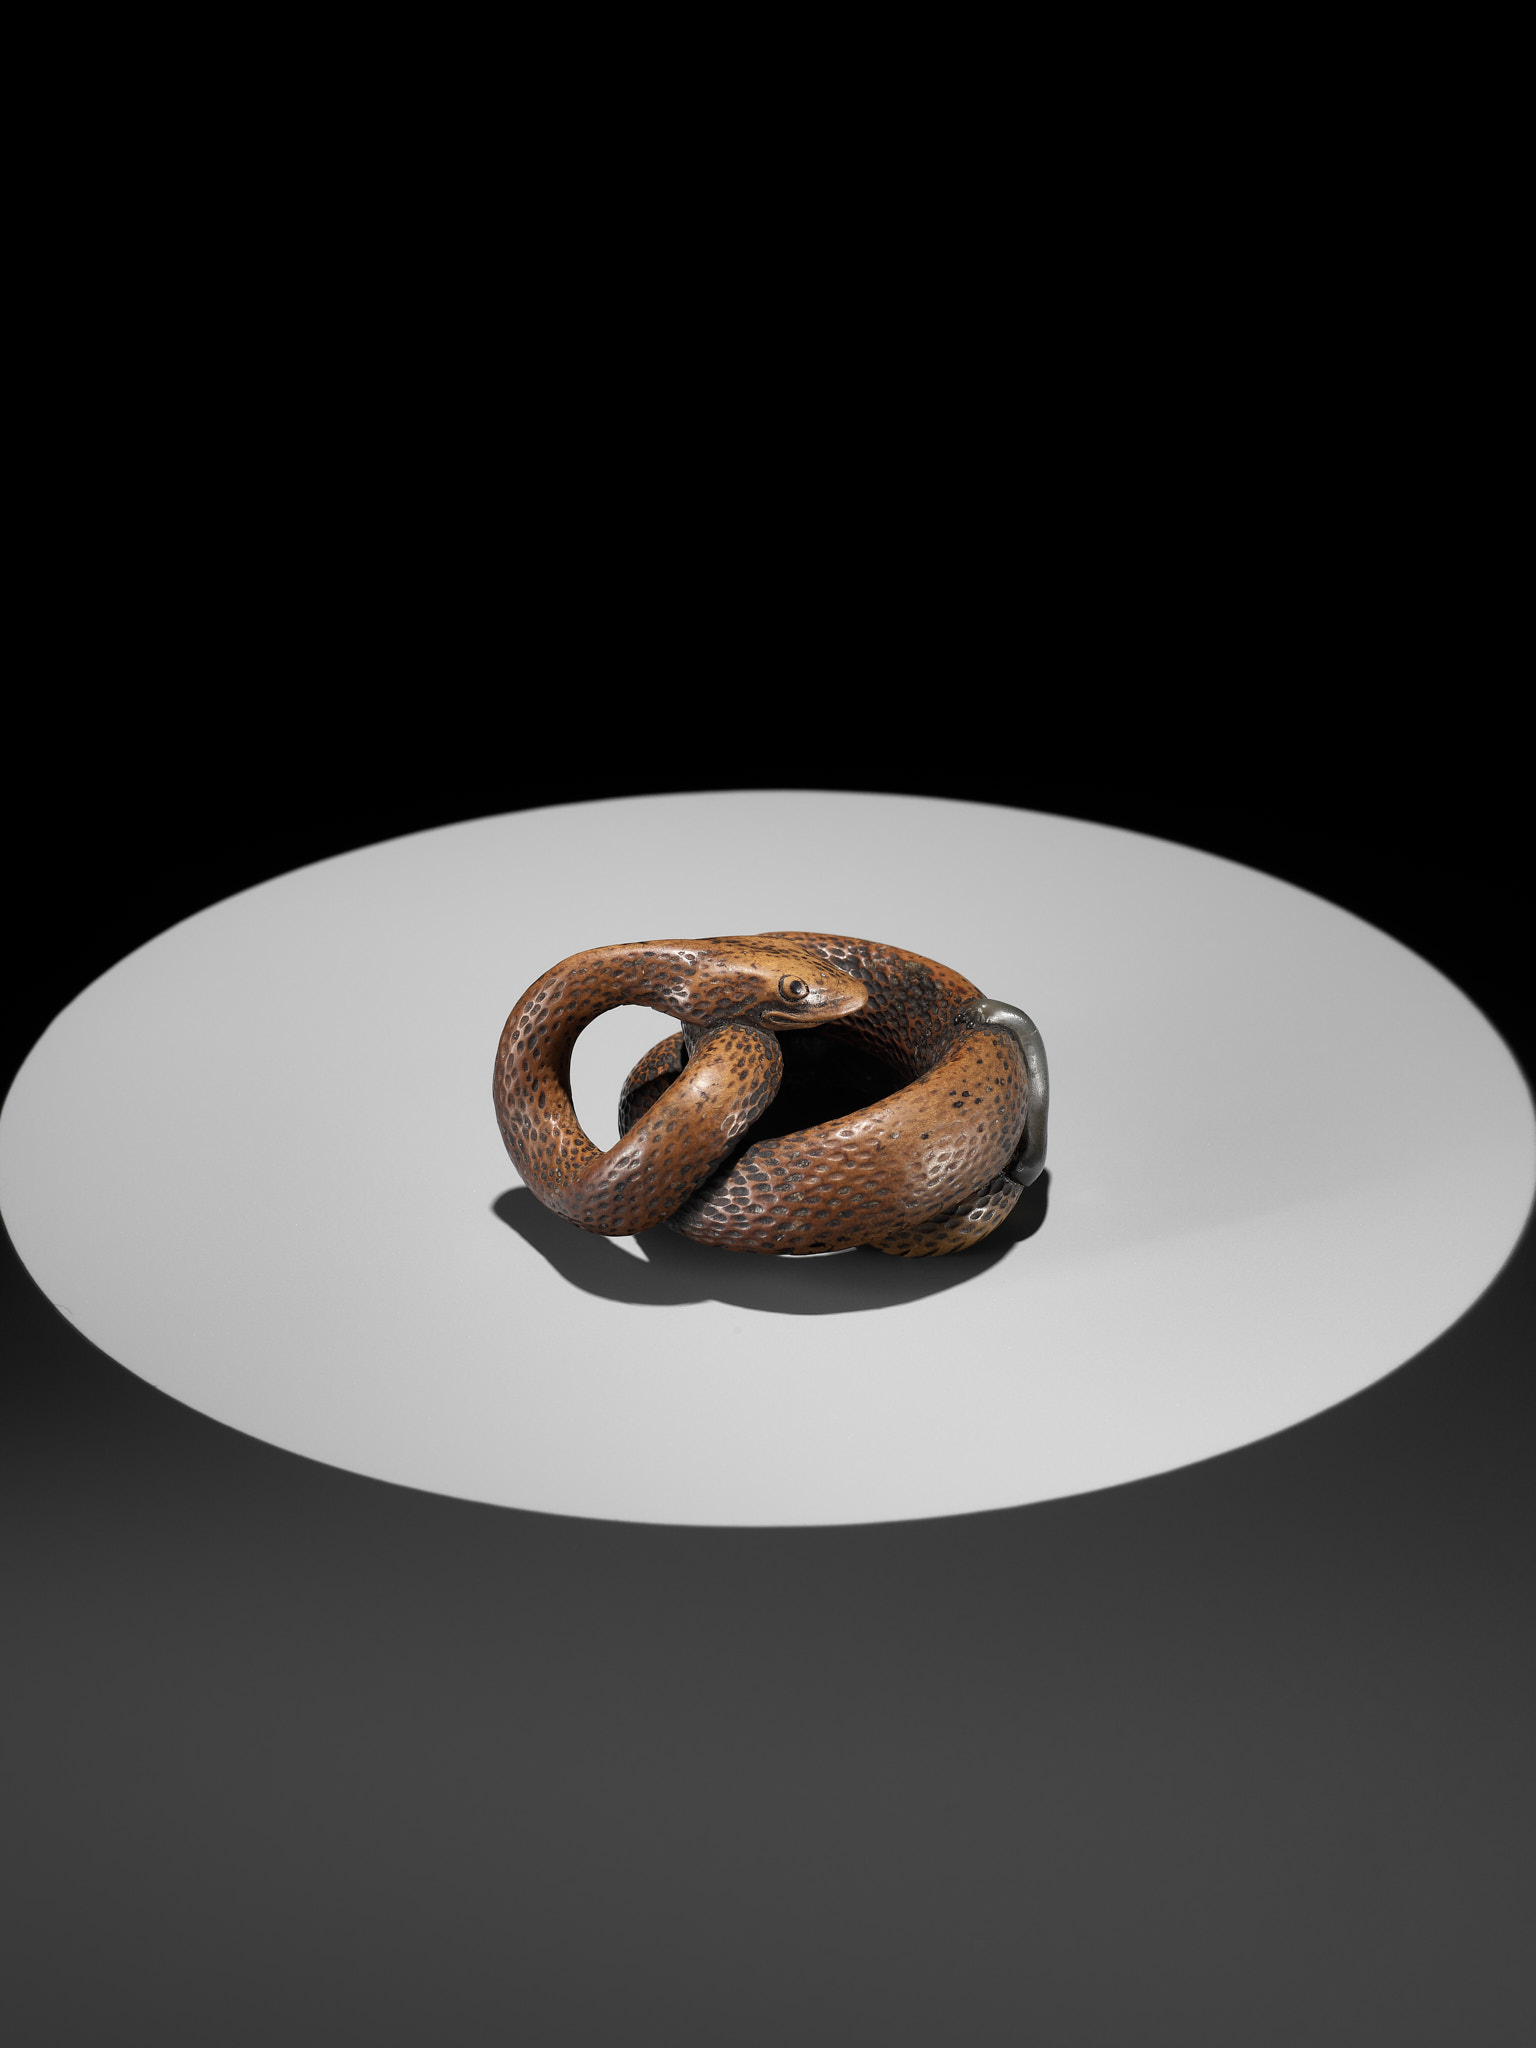 A LARGE AND POWERFUL WOOD NETSUKE OF A COILED SNAKE WITH AN INLAID SLUG BY TOMOKAZU - Image 8 of 13